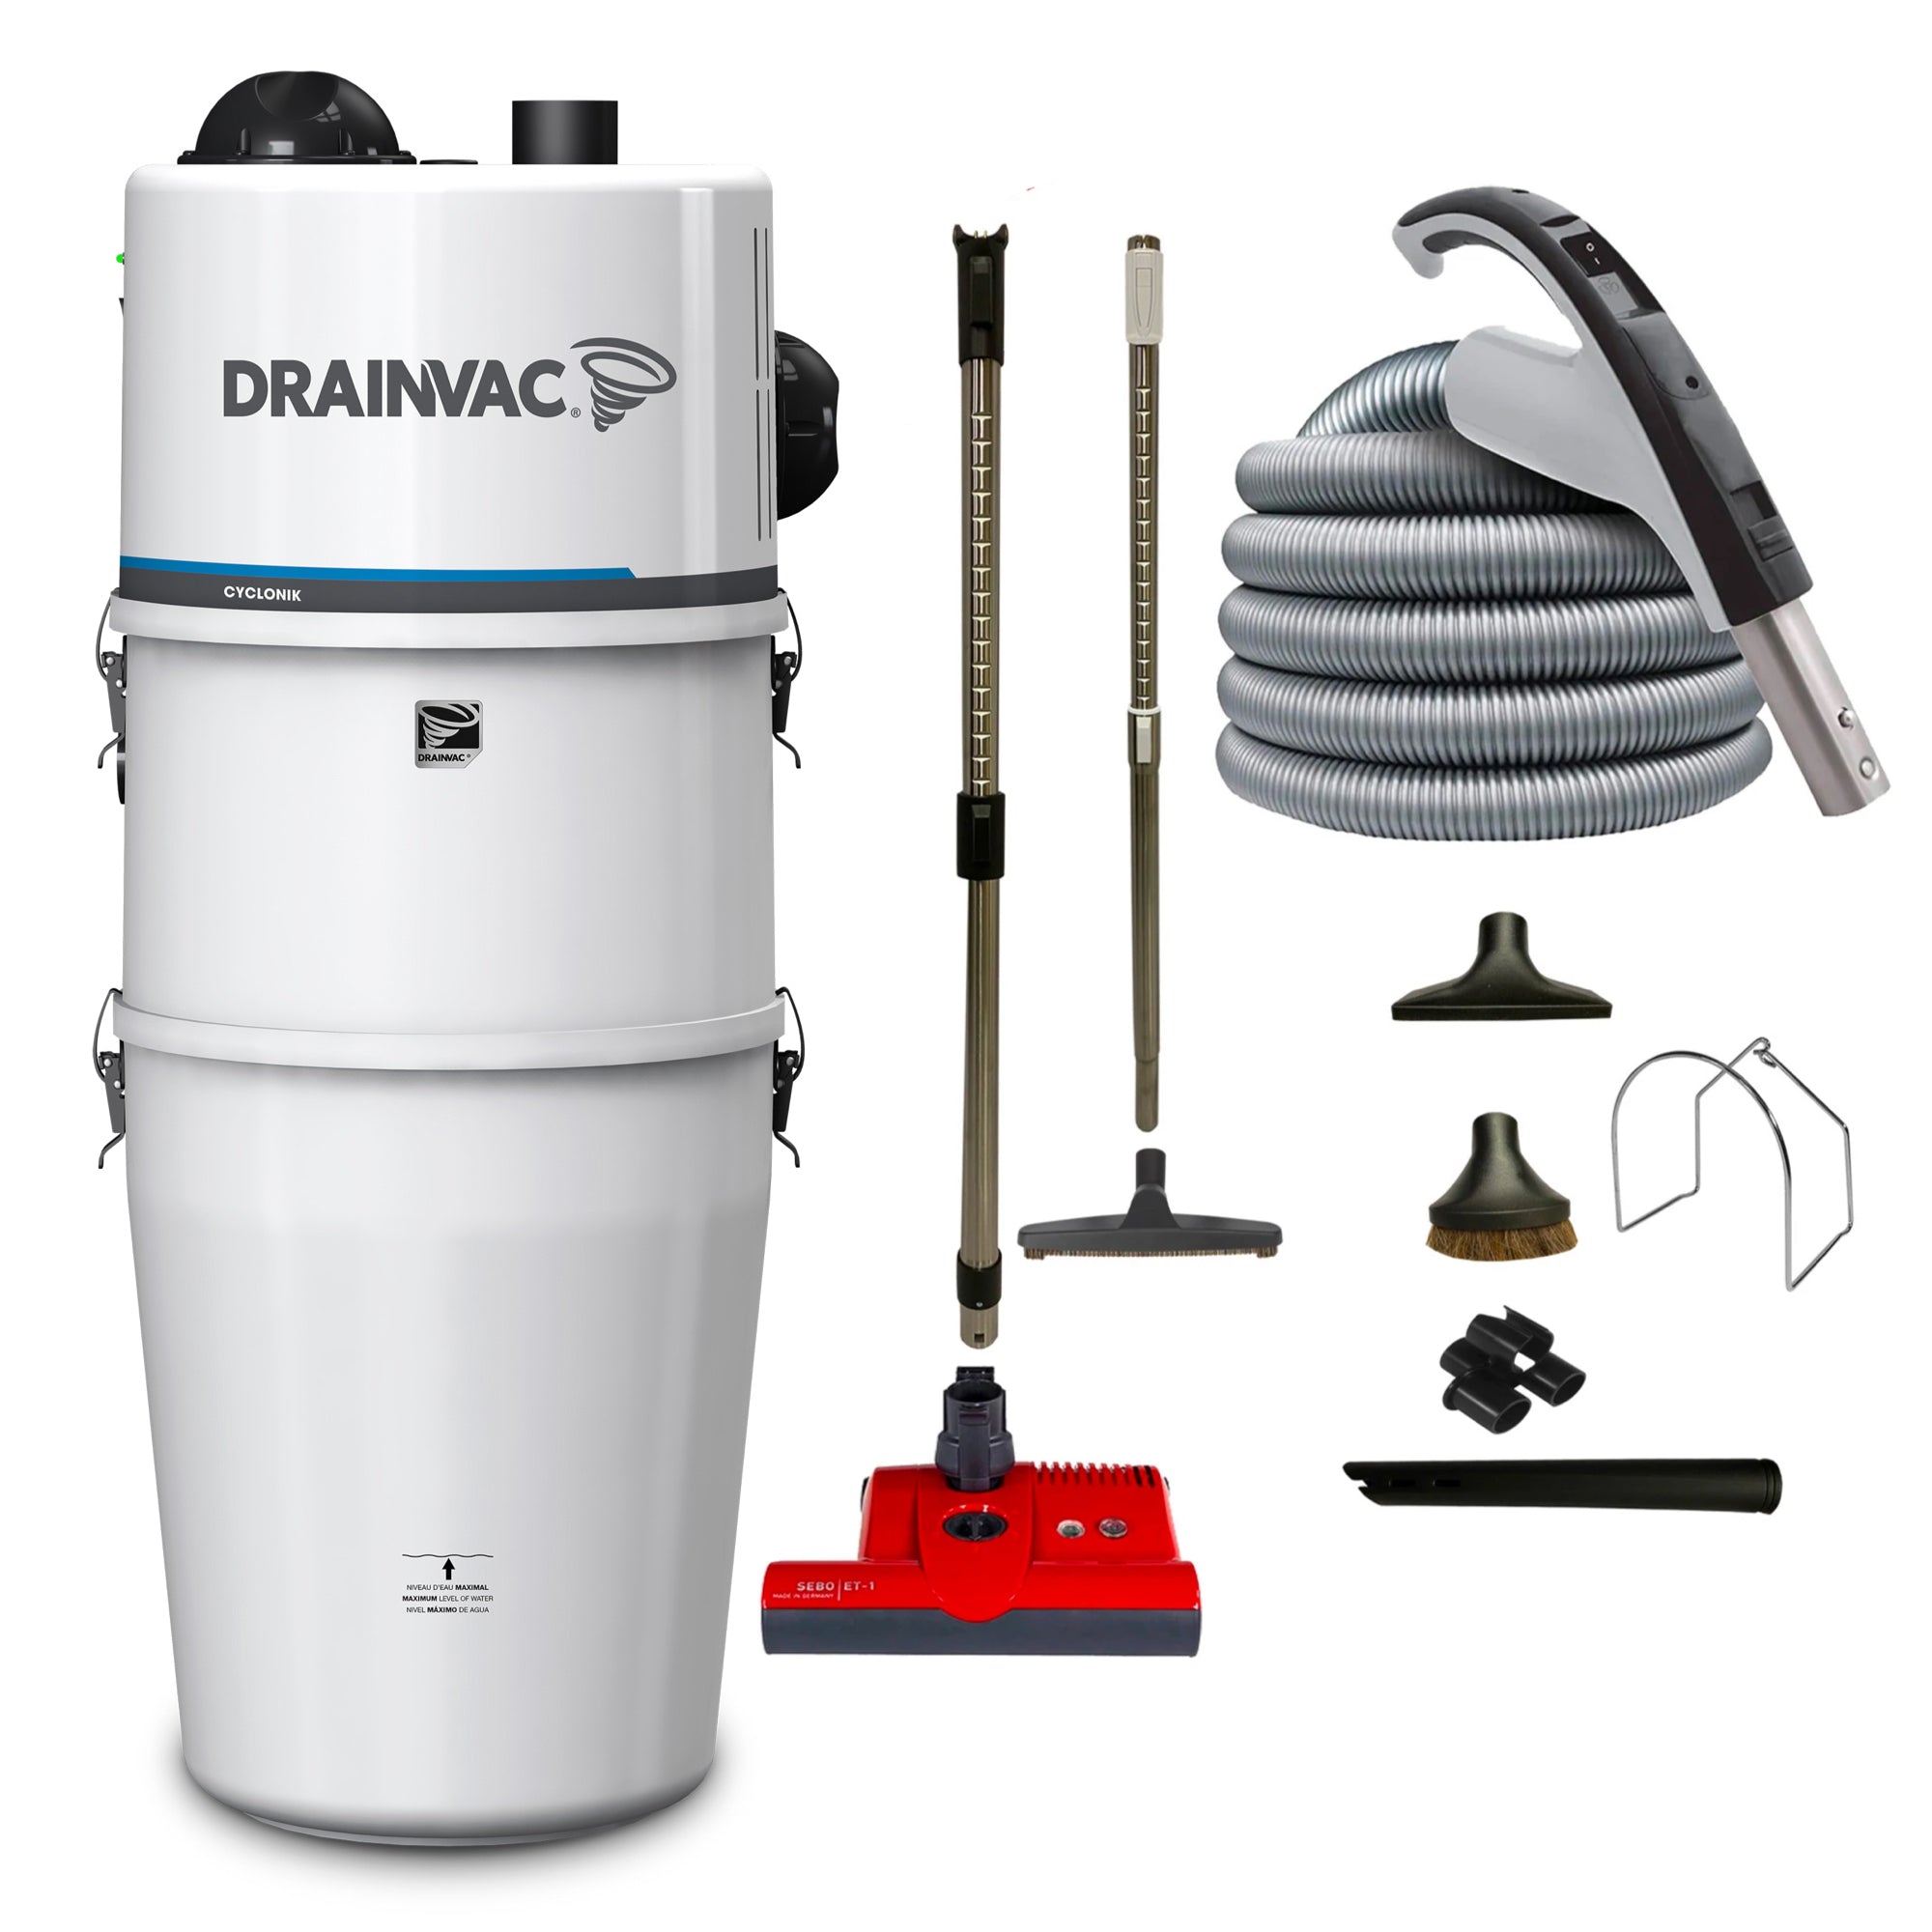 DrainVac Cyclonik Central Vacuum with SEBO ET-1 Electric Package